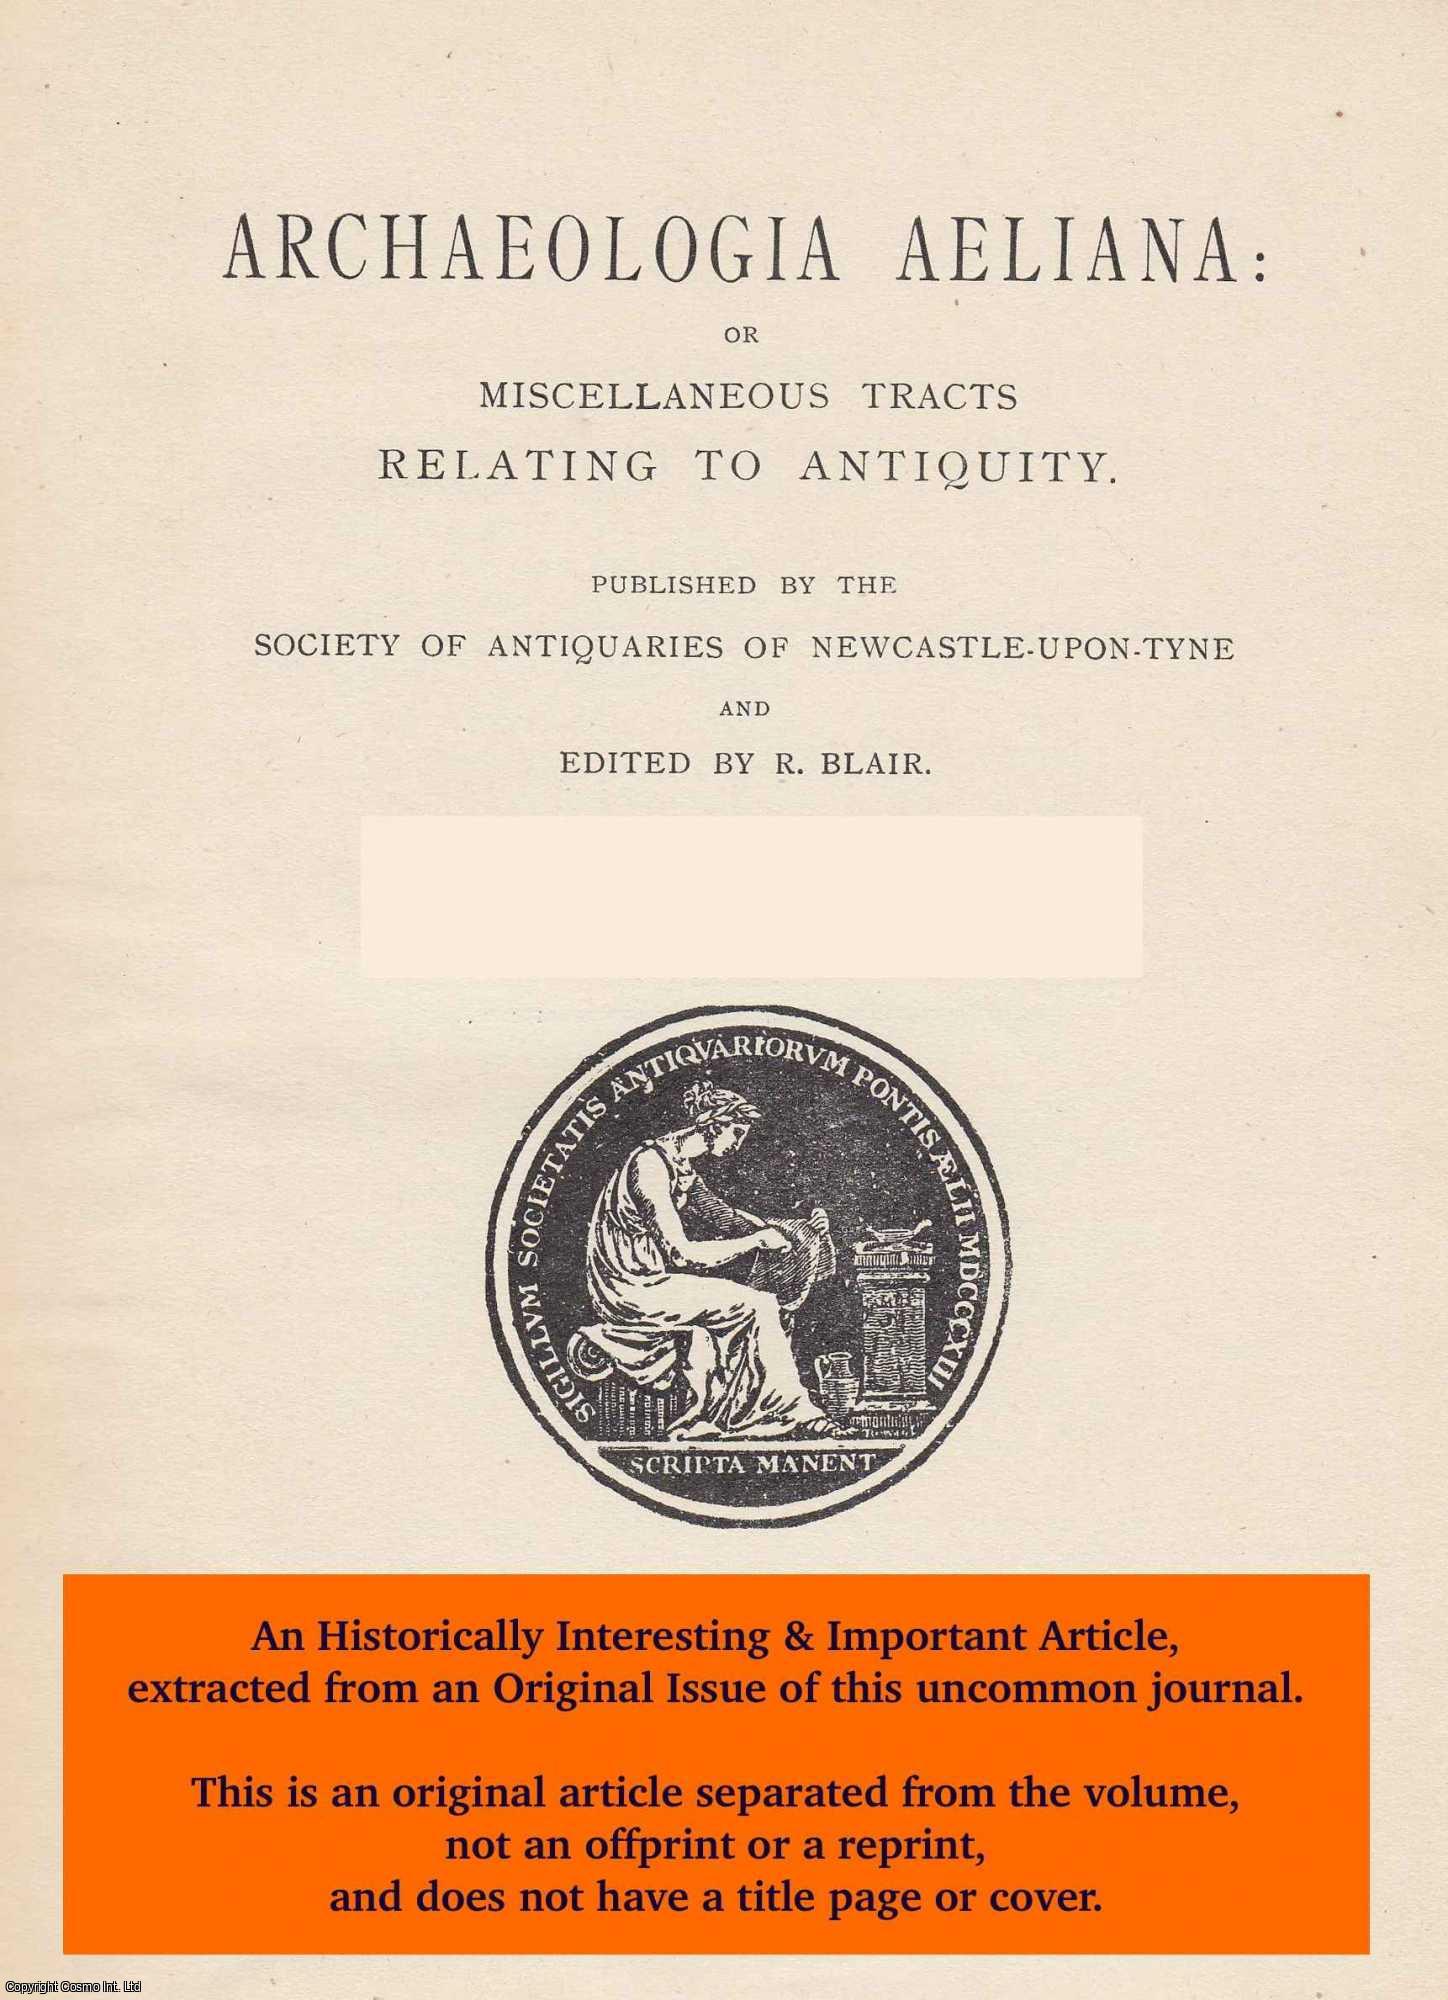 William Waymouth Gibson, William Waymouth - The Manor of Winlaton. An original article from The Archaeologia Aeliana: or Miscellaneous Tracts Relating to Antiquity, 1945.